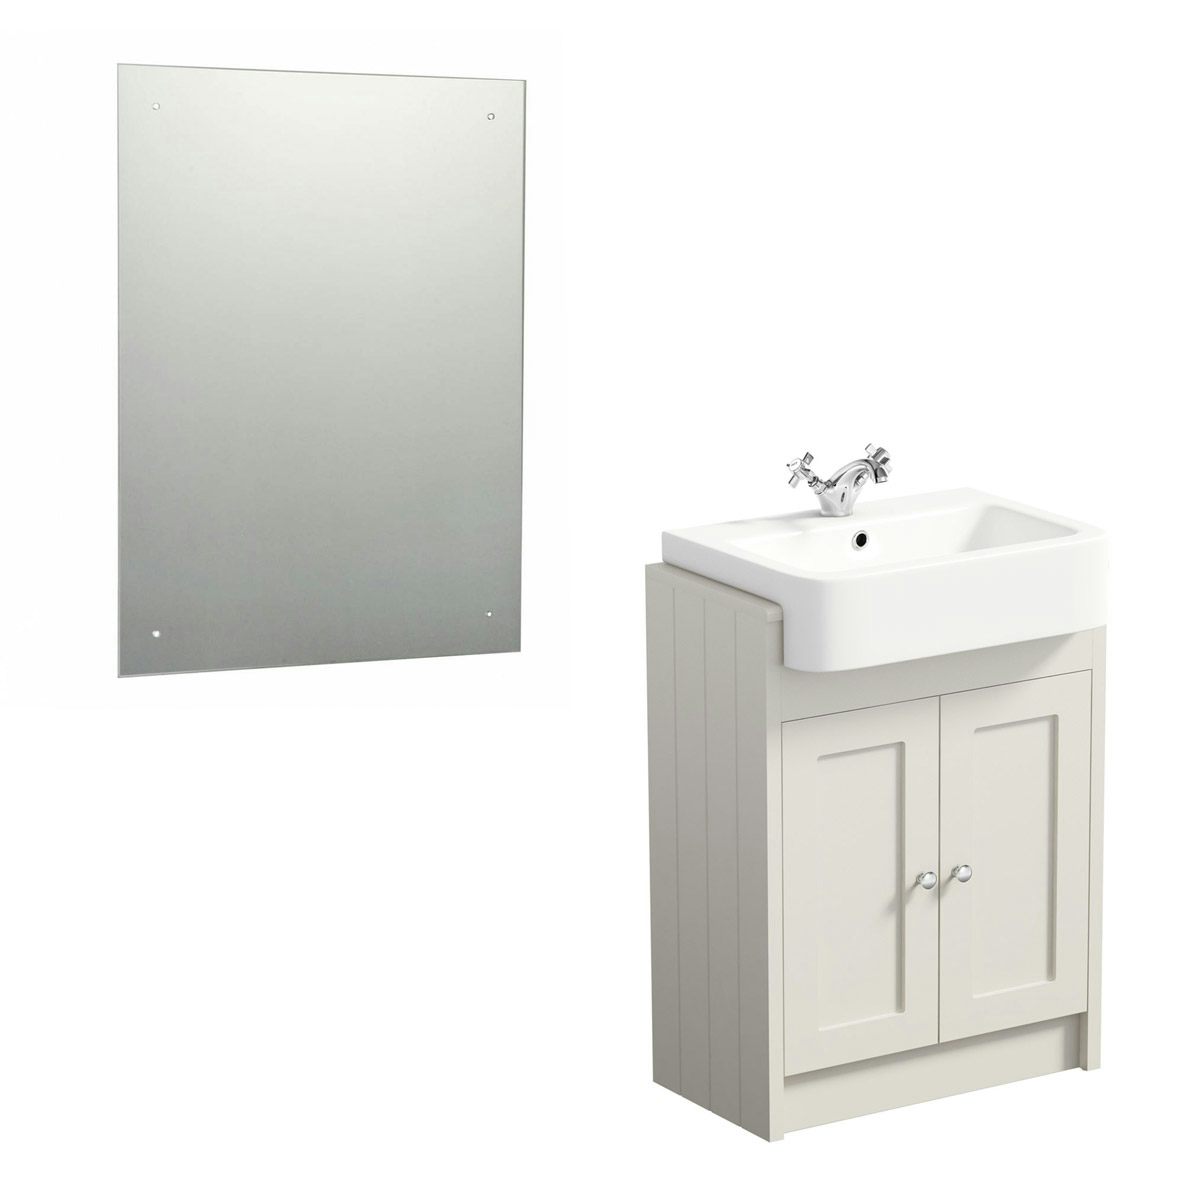 The Bath Co Dulwich stone ivory floorstanding vanity unit with semi recessed basin 600mm 